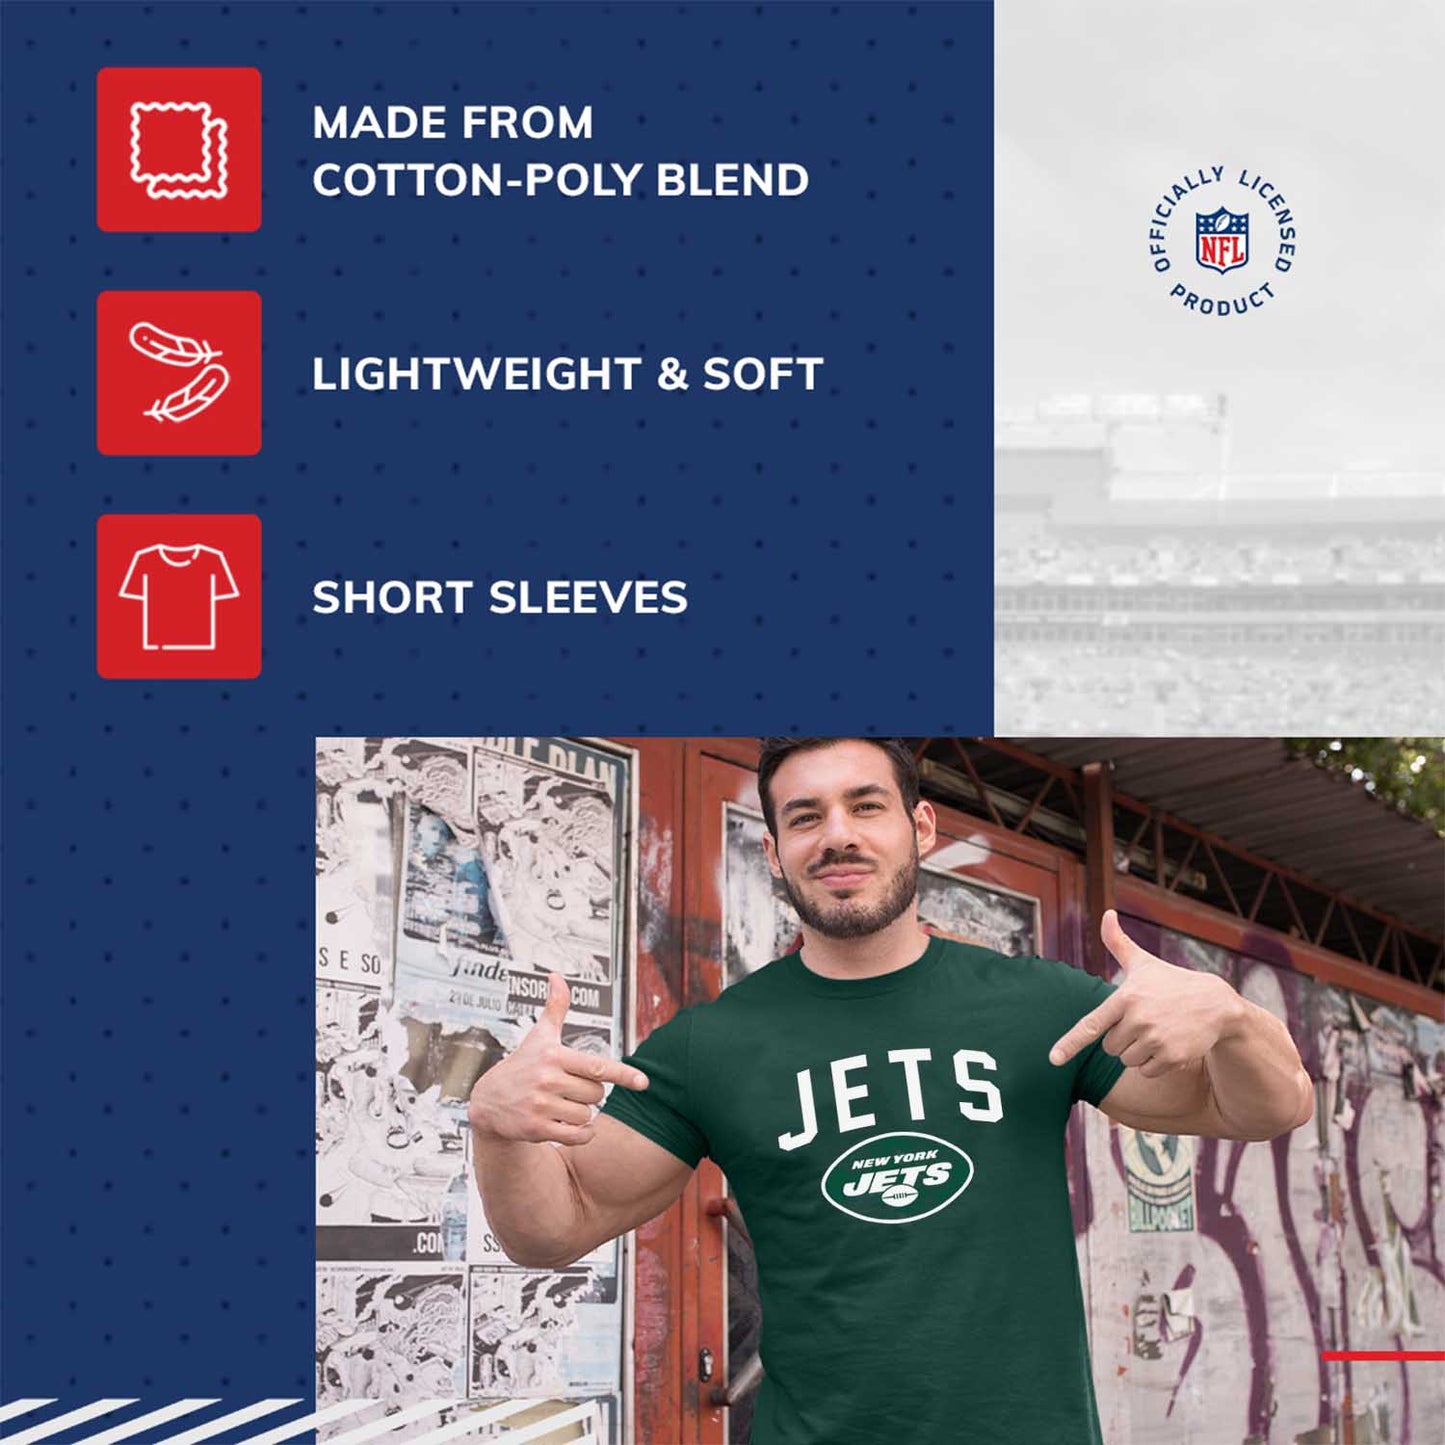 New York Jets NFL Home Team Tee - Forest Green